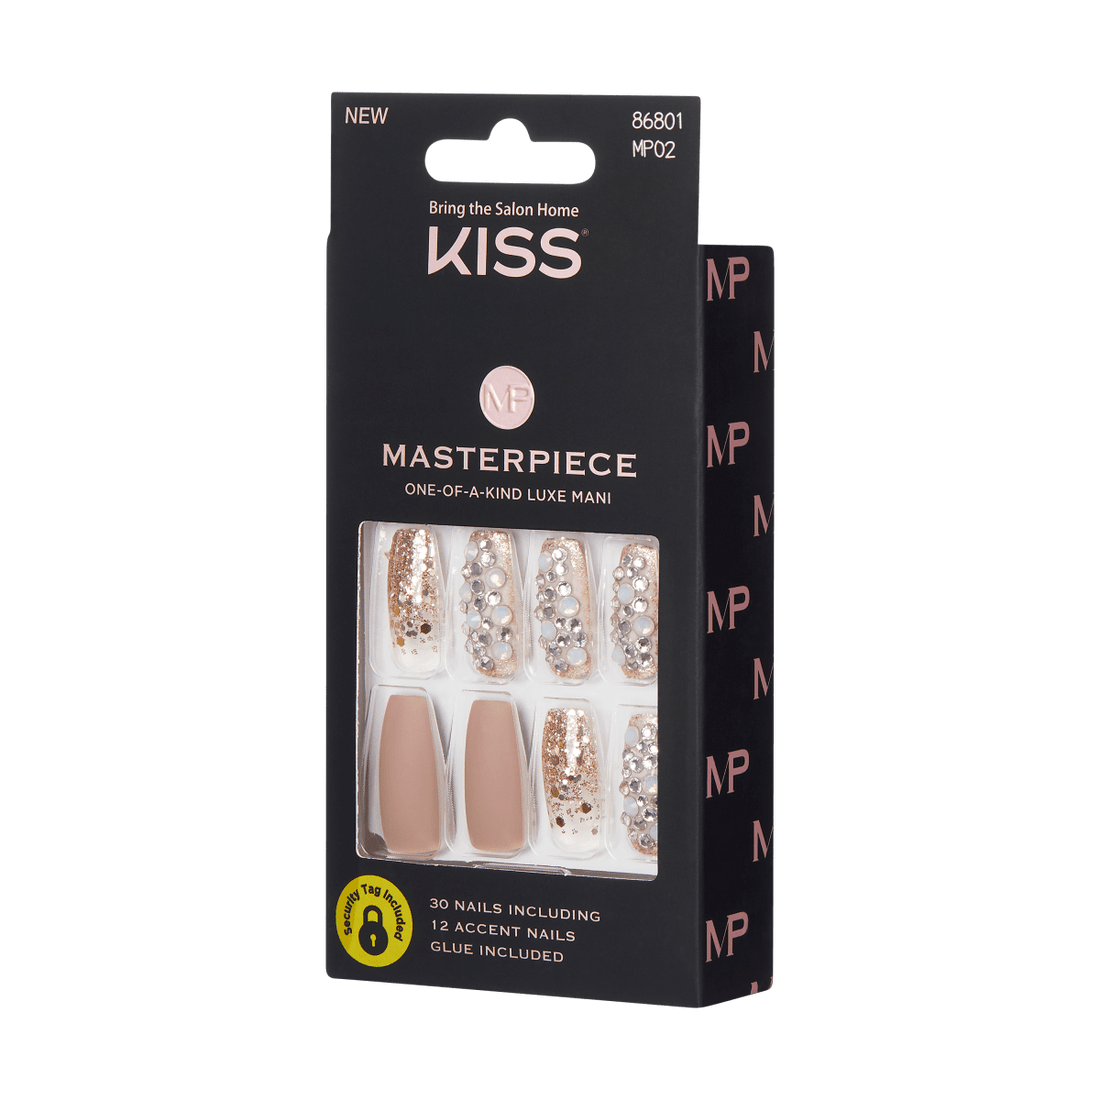 KISS Masterpiece, Press-On Nails, Heirloom, Beige, Long Coffin, 30ct